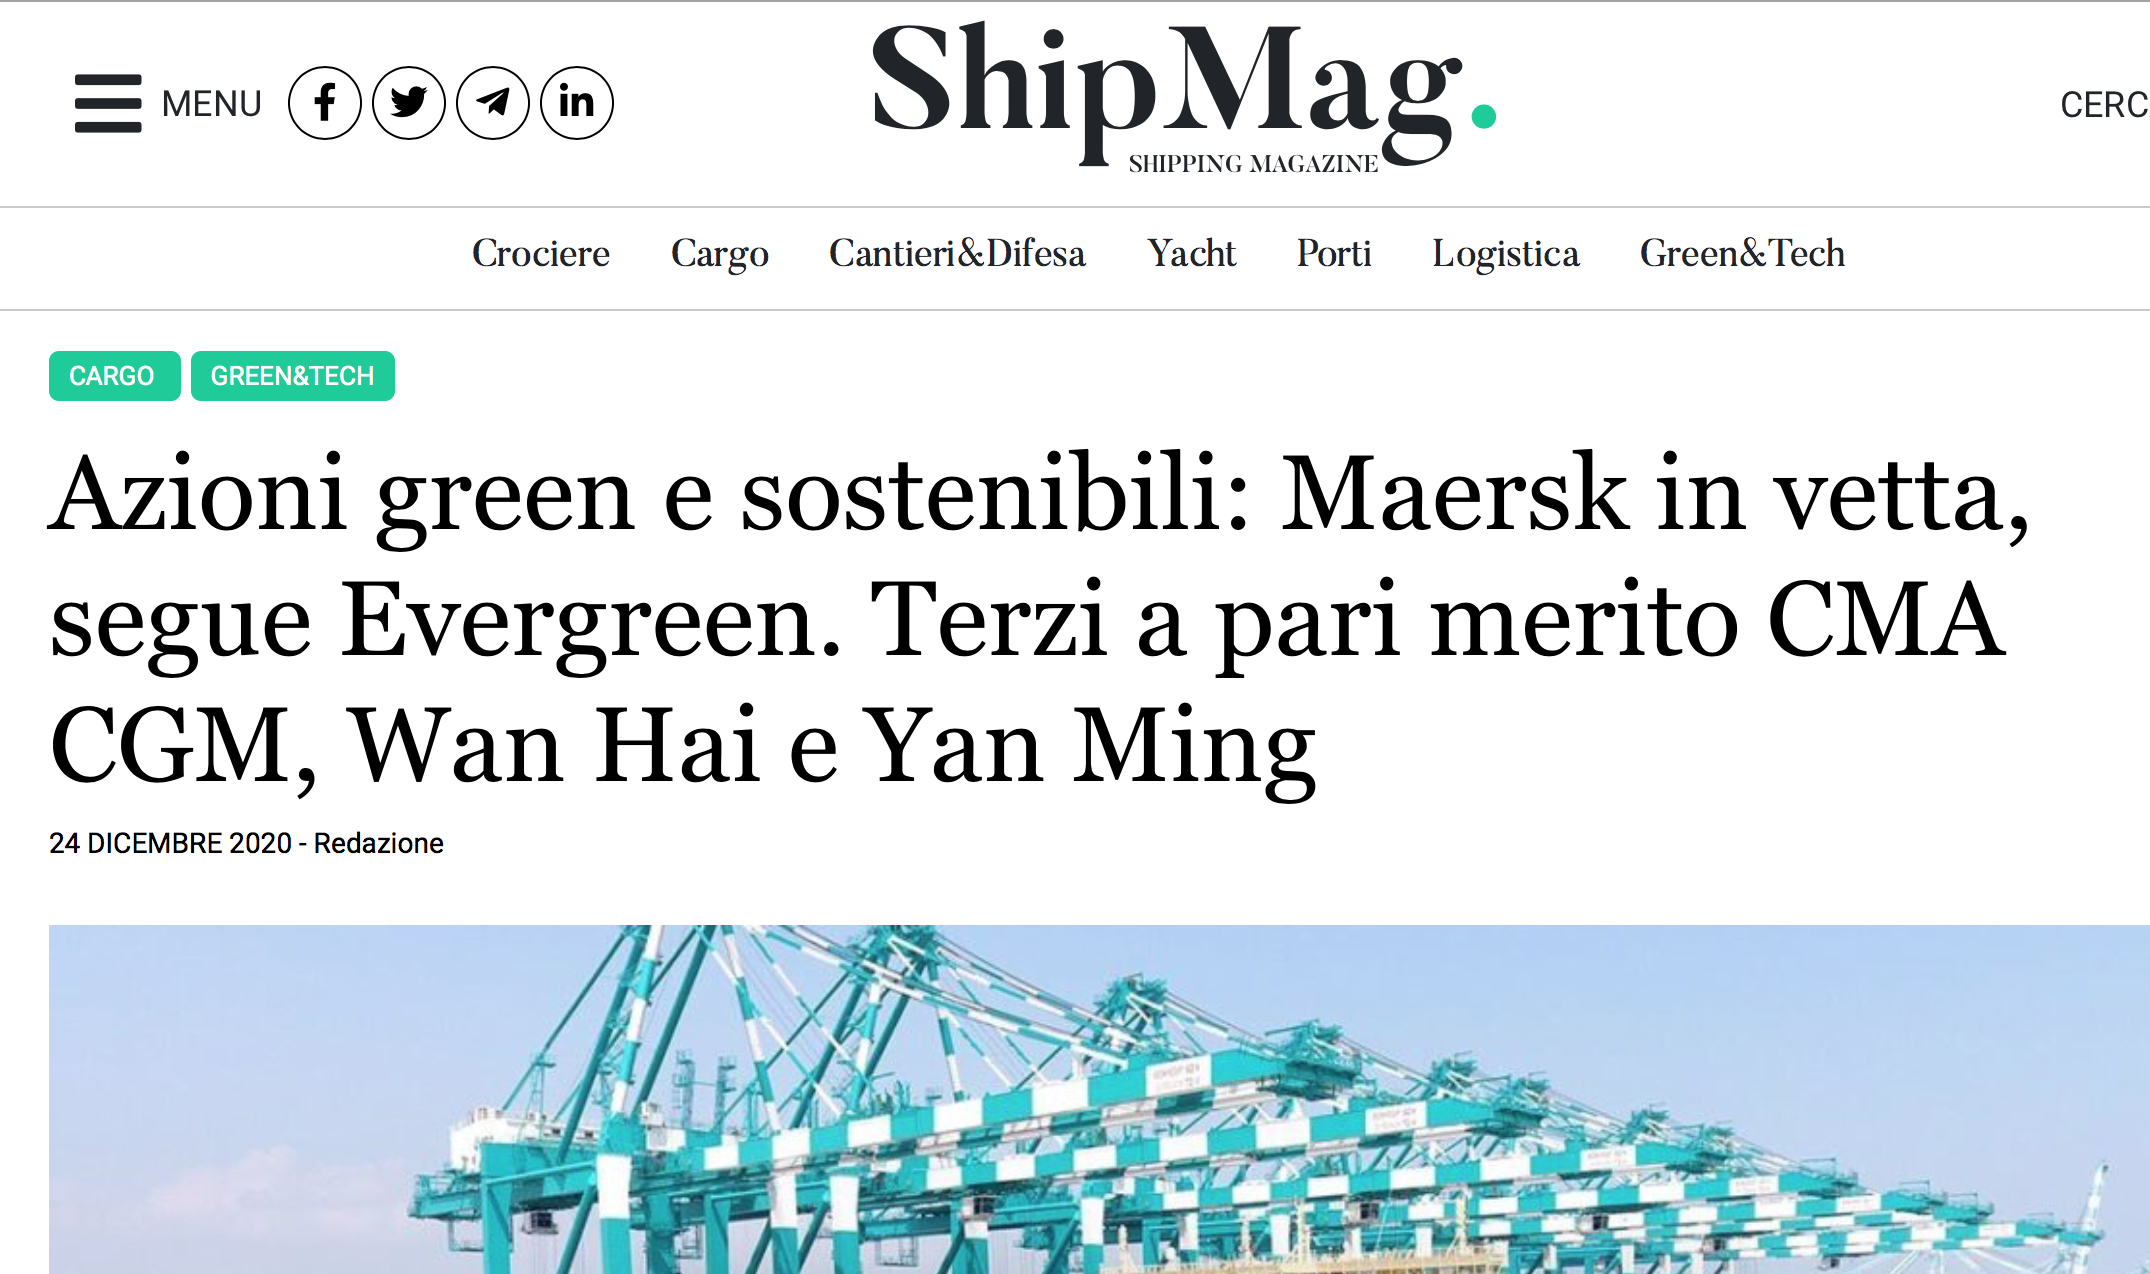 ShipMag from Italy